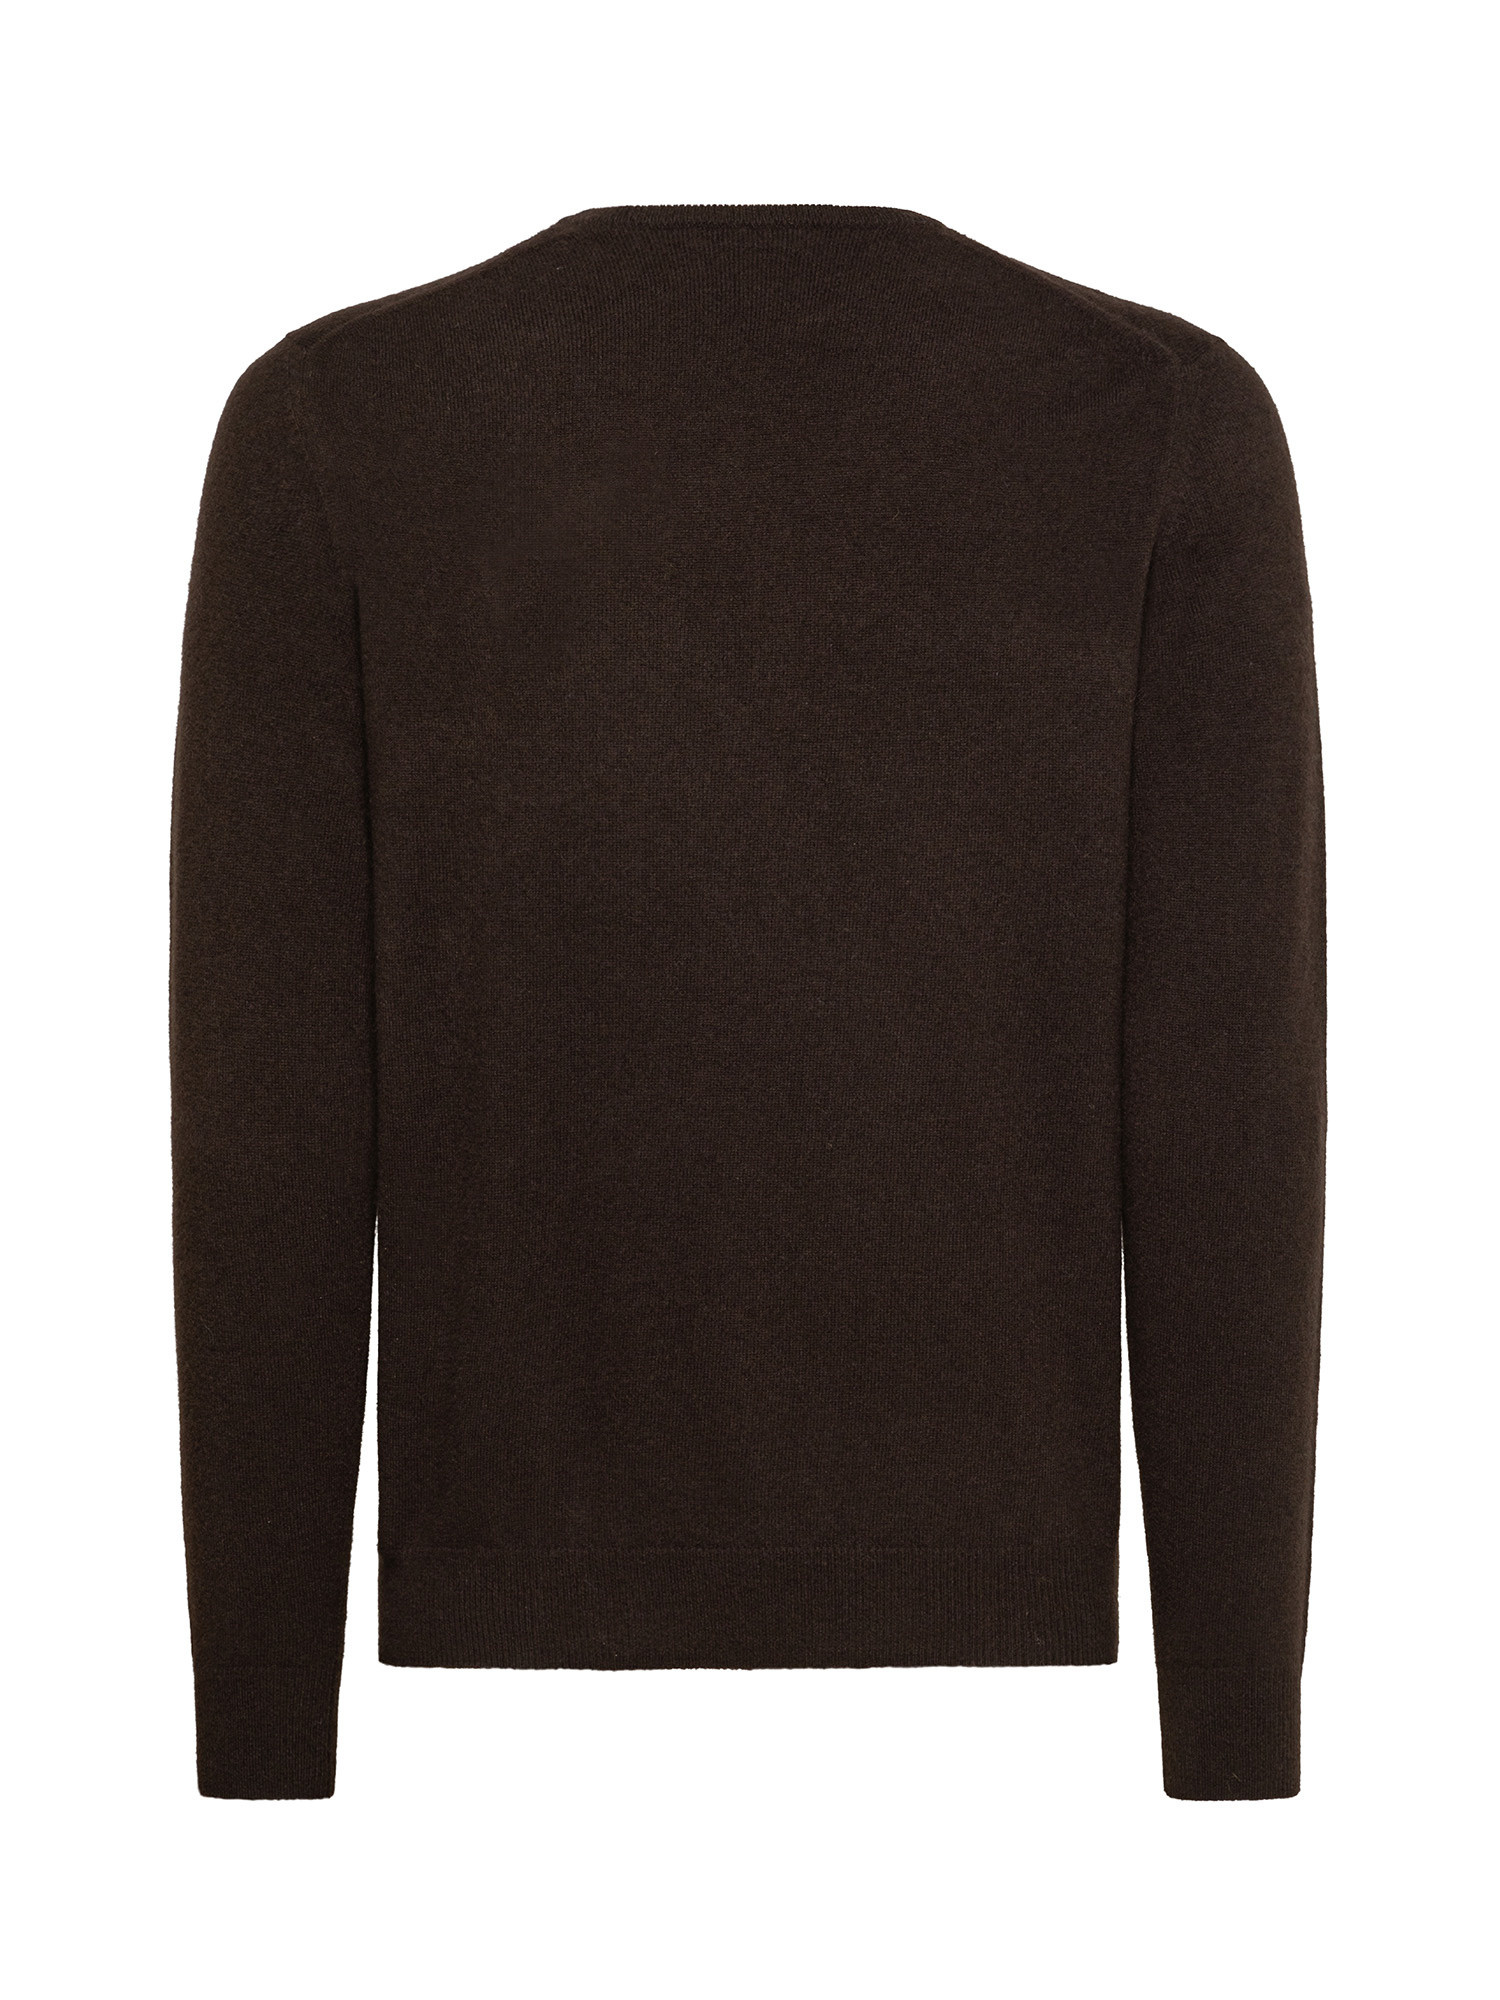 Pullover girocollo in puro cashmere, Marrone, large image number 1